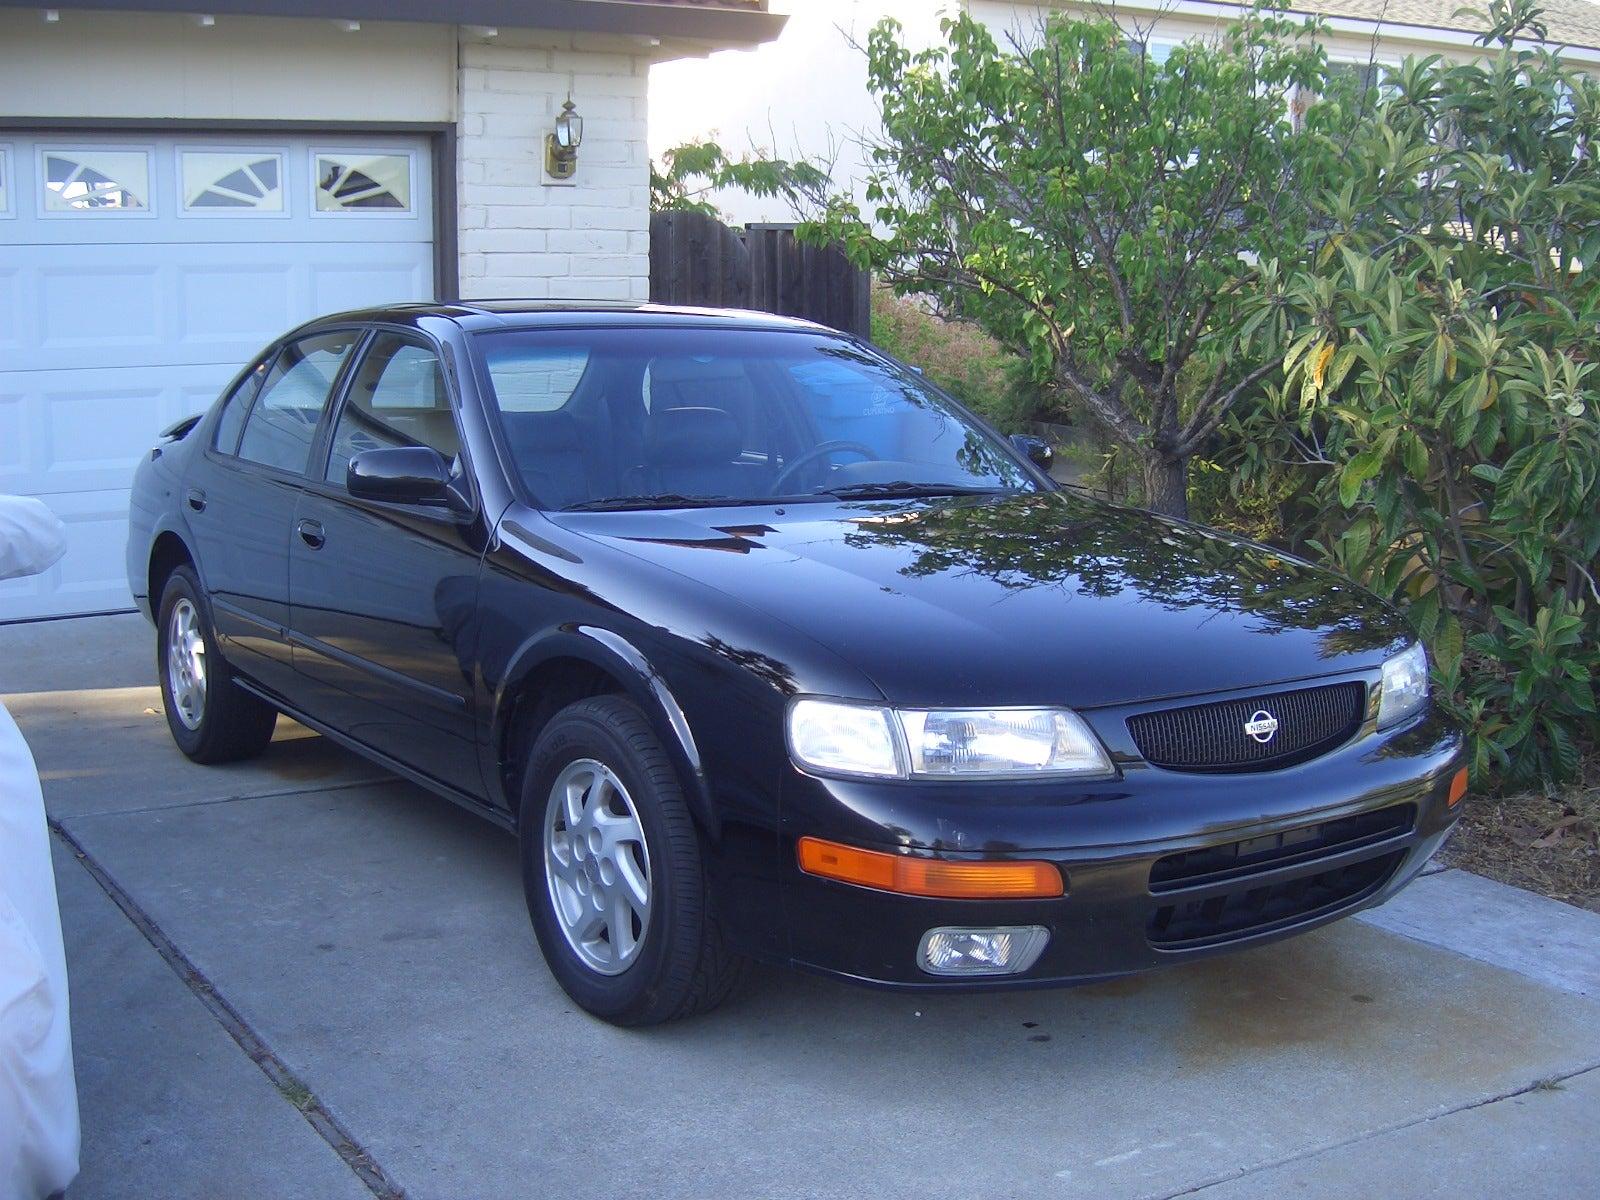 Picture of a 1996 nissan maxima #4